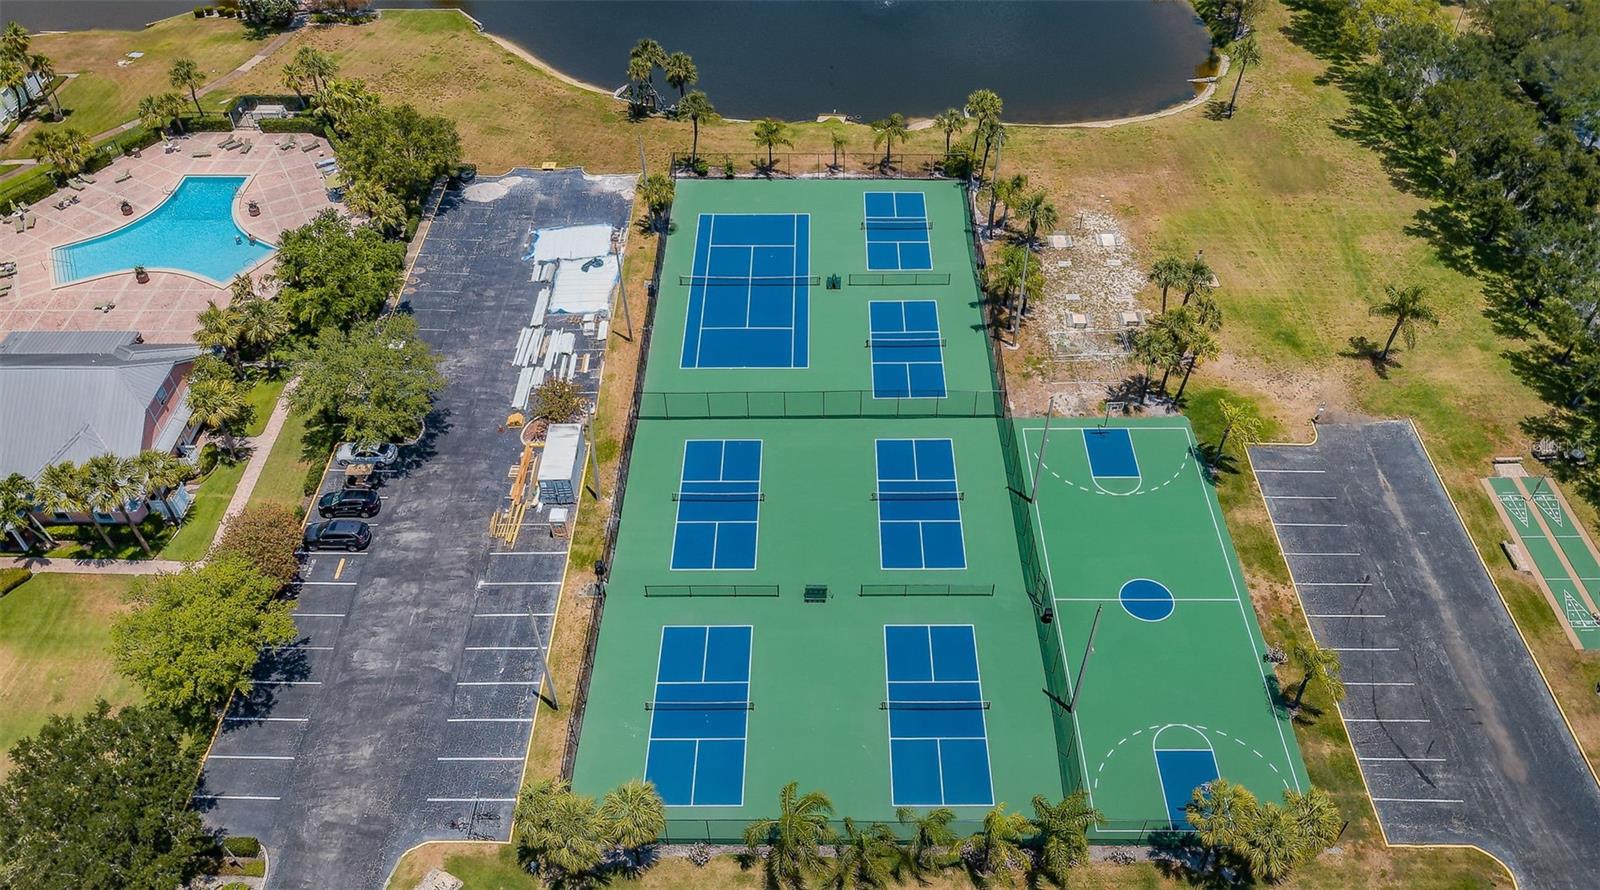 More courts right across the pond